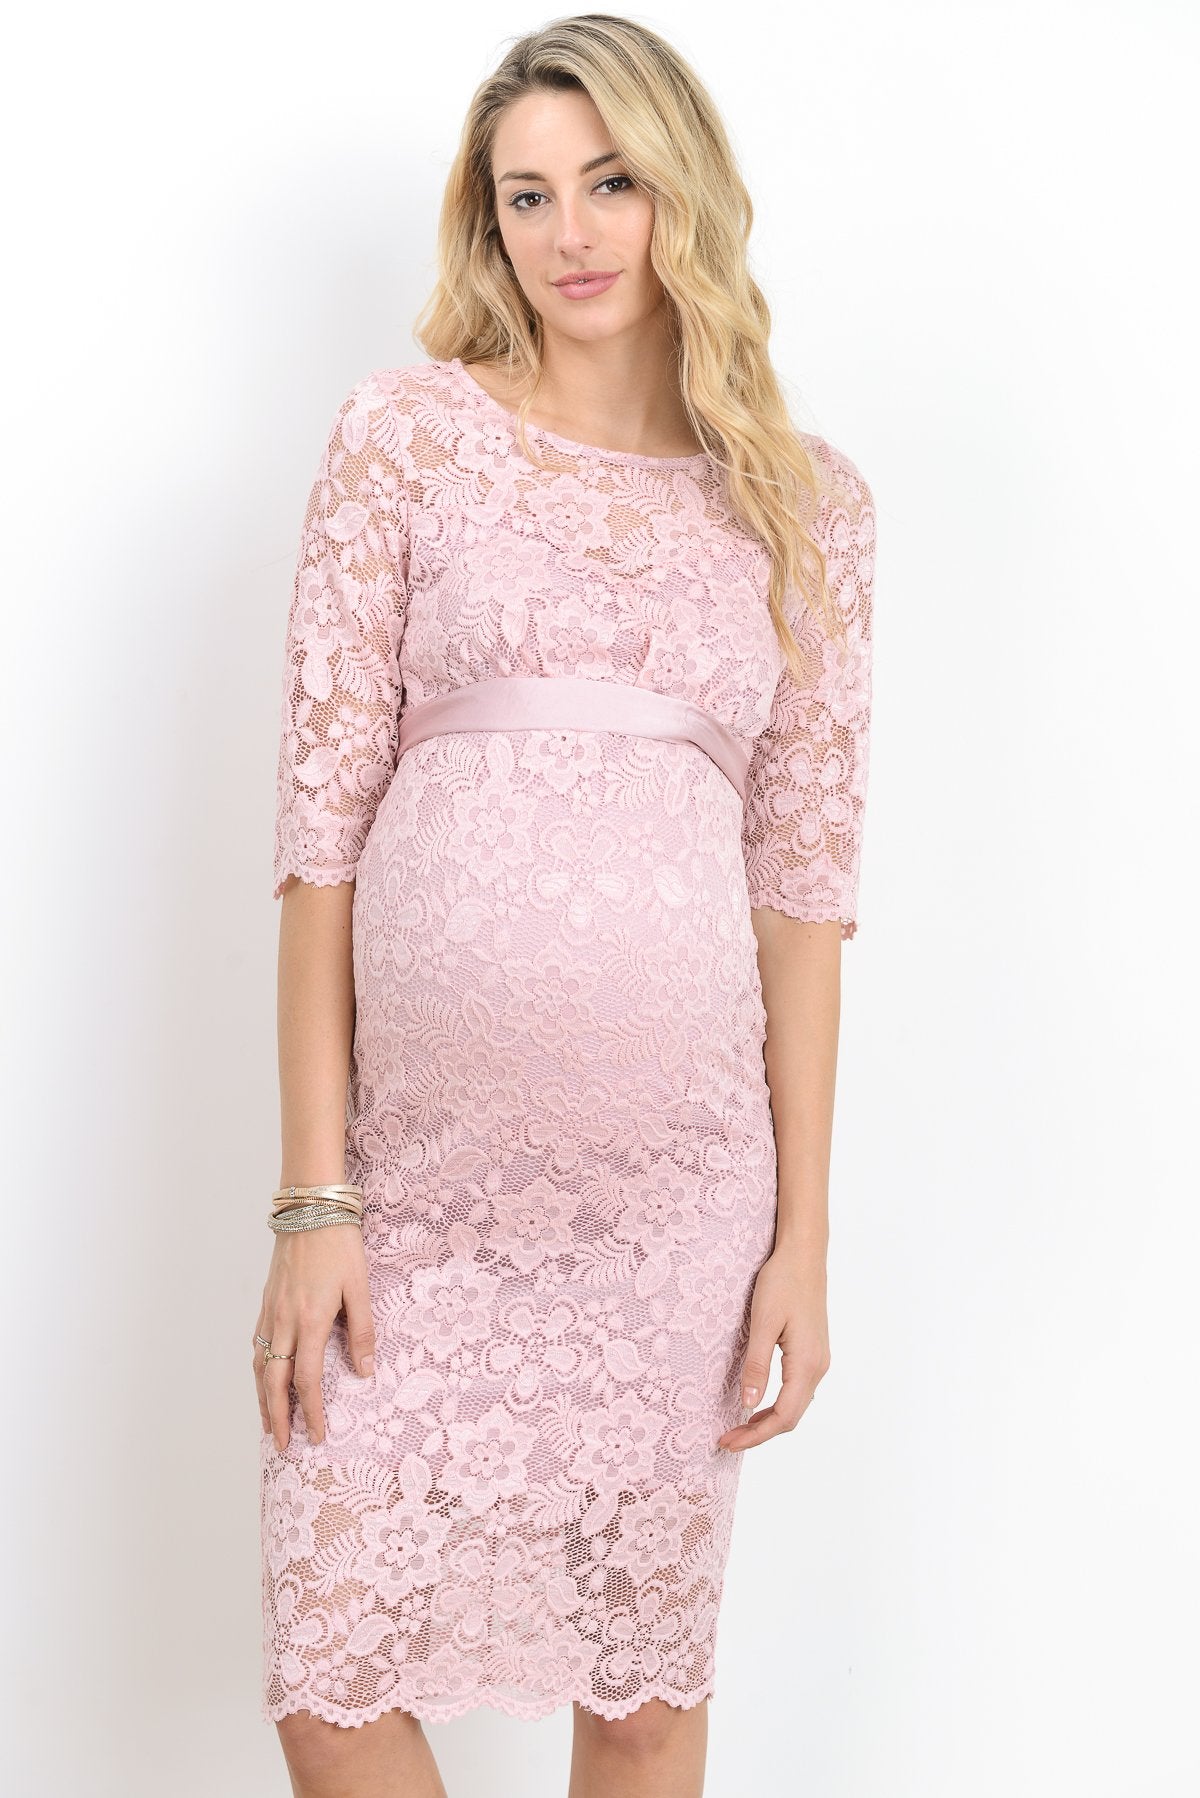 Maternity Gown Fitted Off The Shoulder Dusty Pink Lace Wrap Dress - June  Bridals